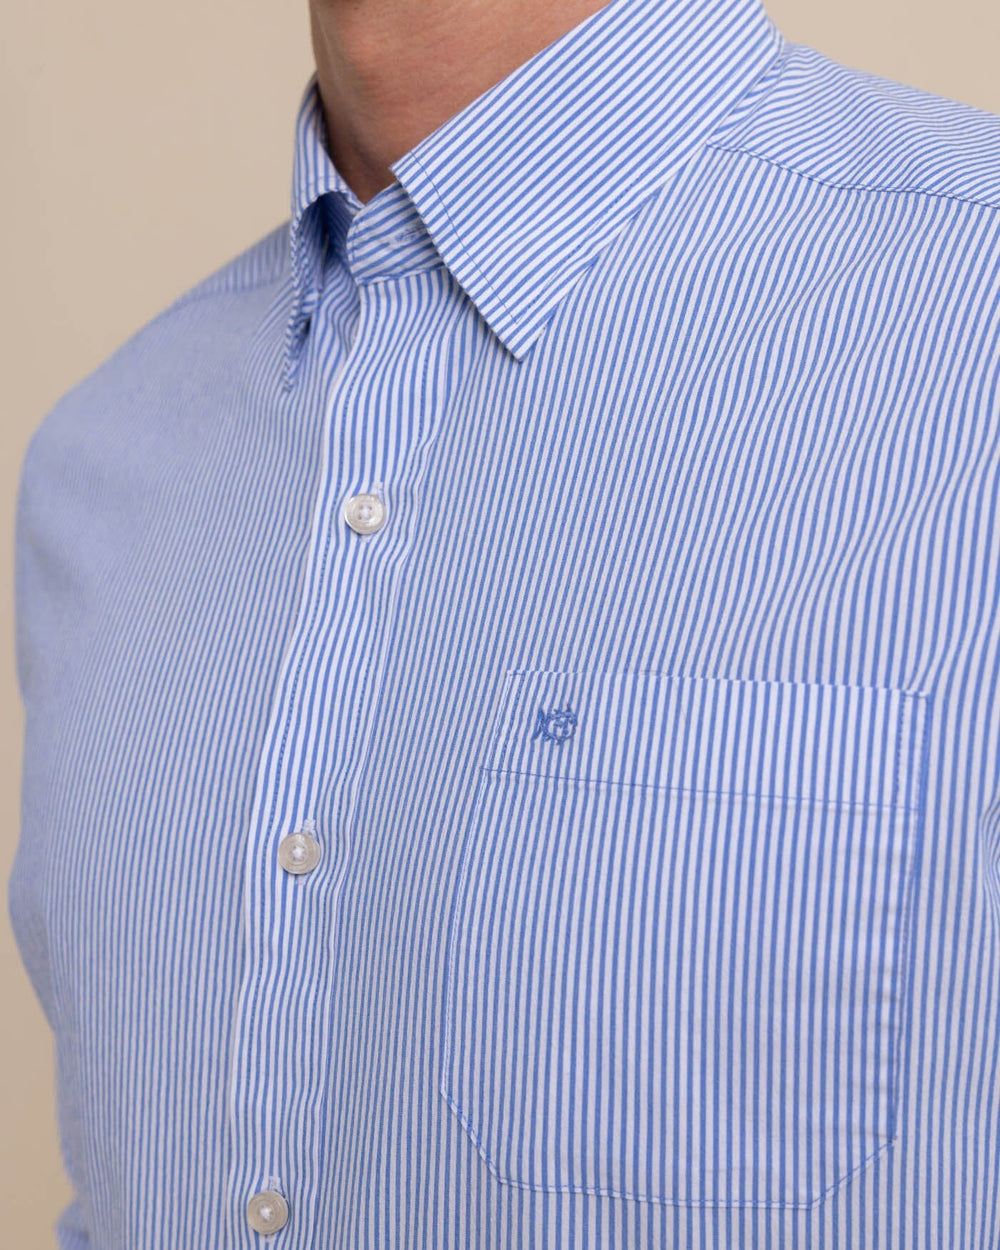 The detail view of the Southern Tide Charleston Granby Stripe Long Sleeve Sport Shirt by Southern Tide - Cobalt Blue